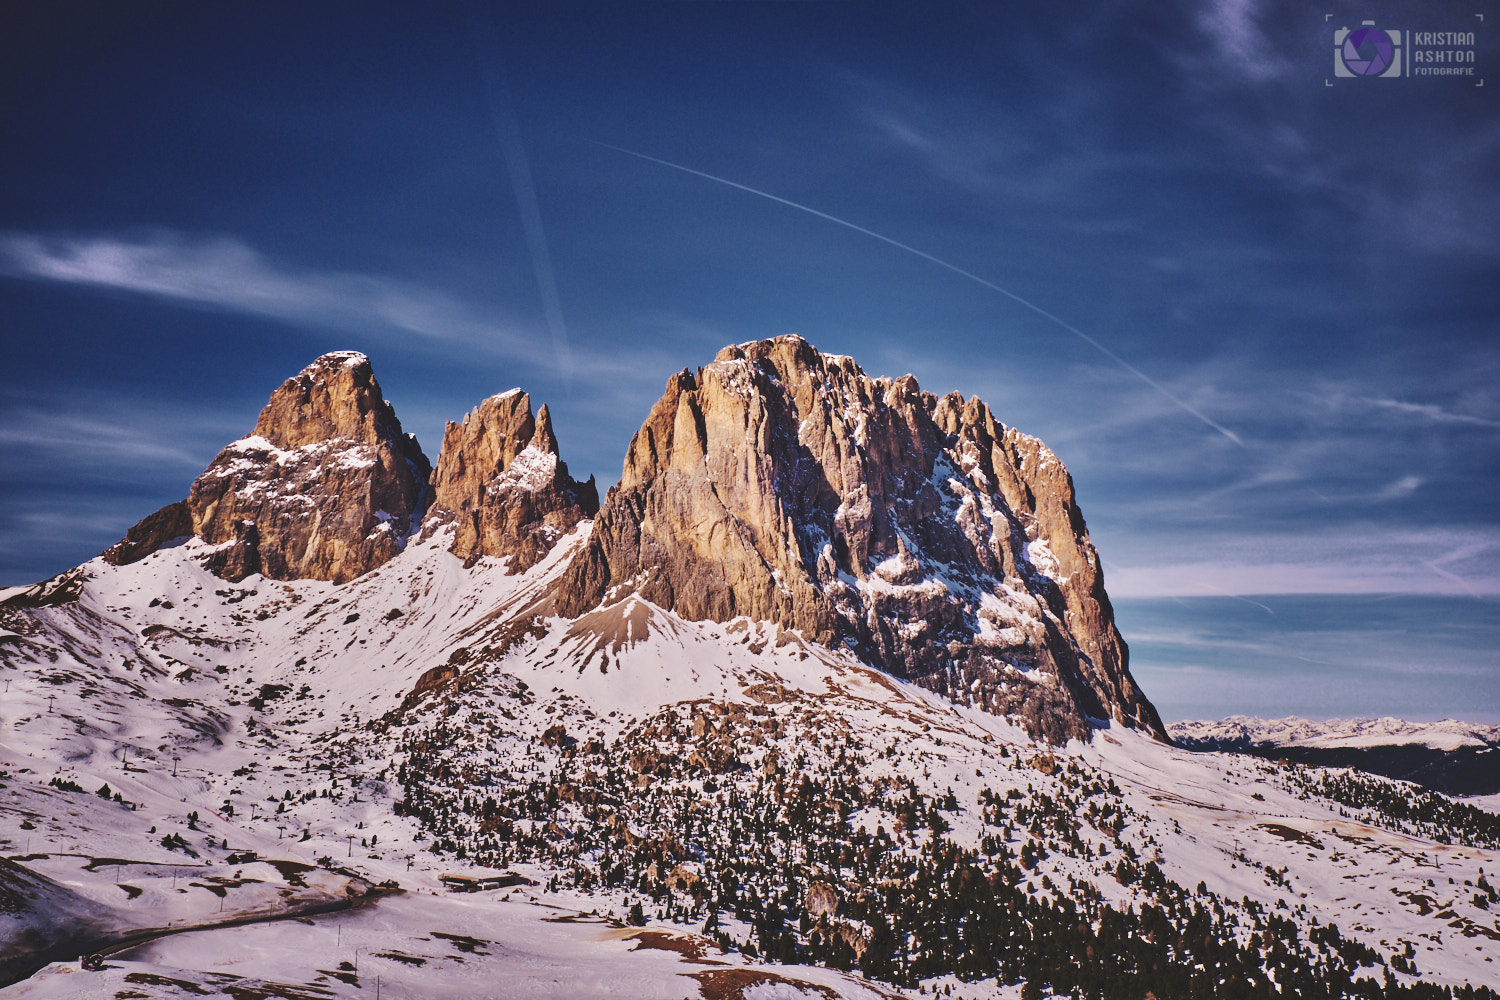 View of the Sella group of mountains from Sella pass